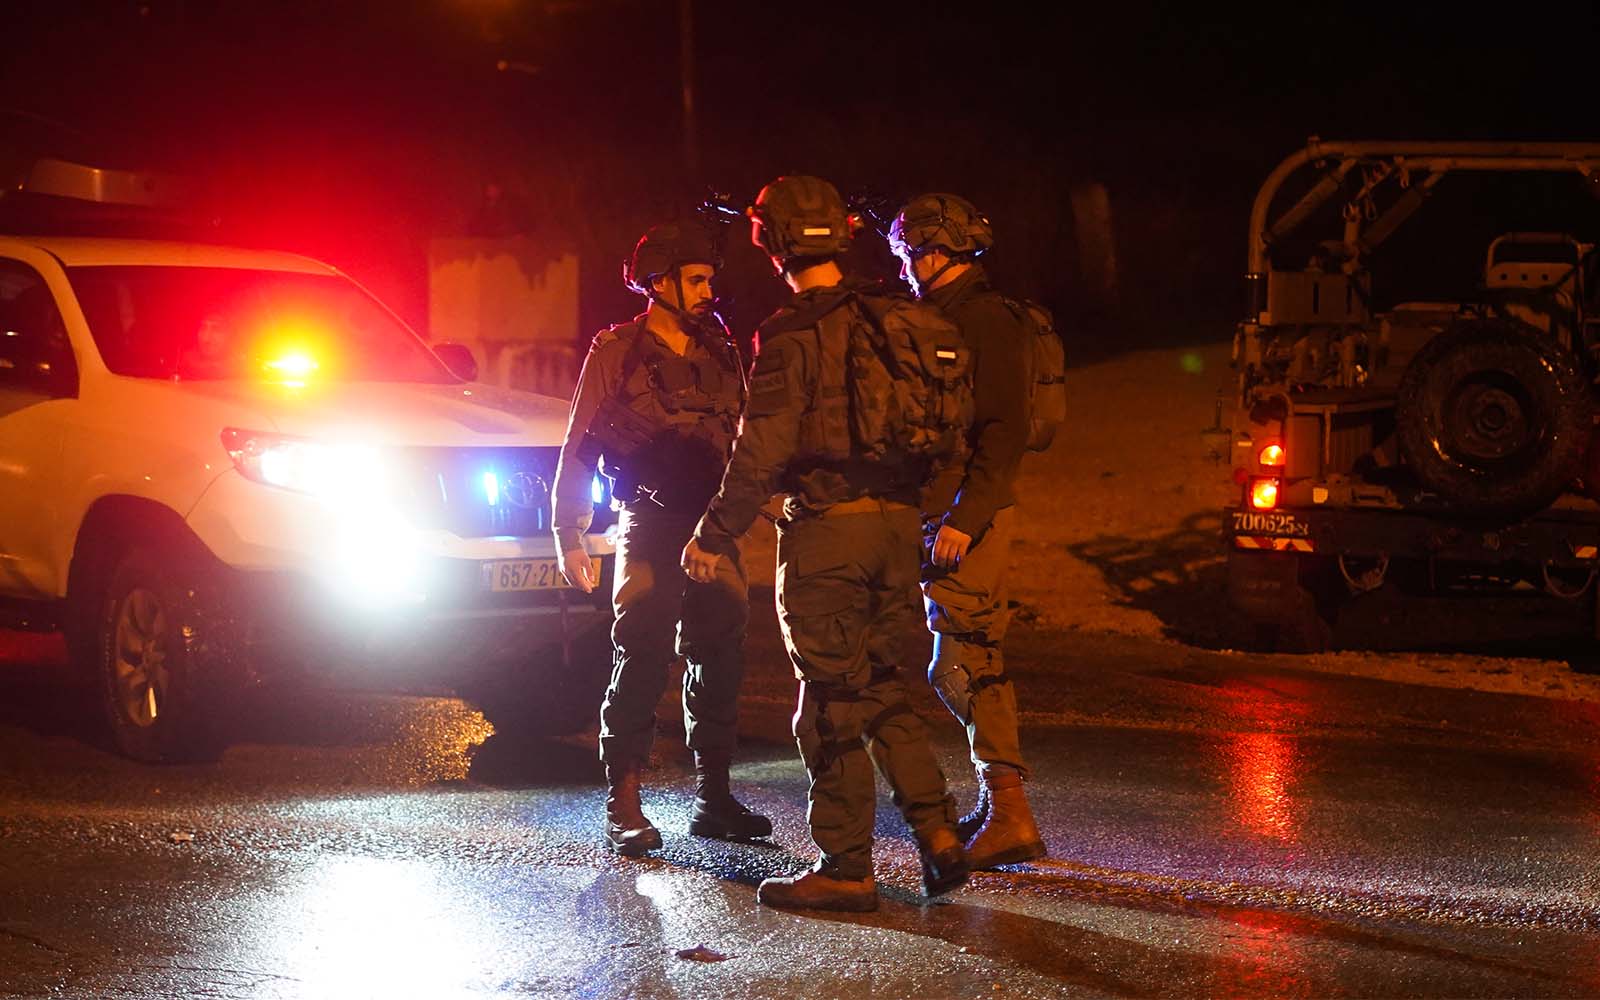 Troops at the scene of a shooting attack near Homesh in the West Bank, on December 16, 2021. (Hillel Maeir/Flash90)